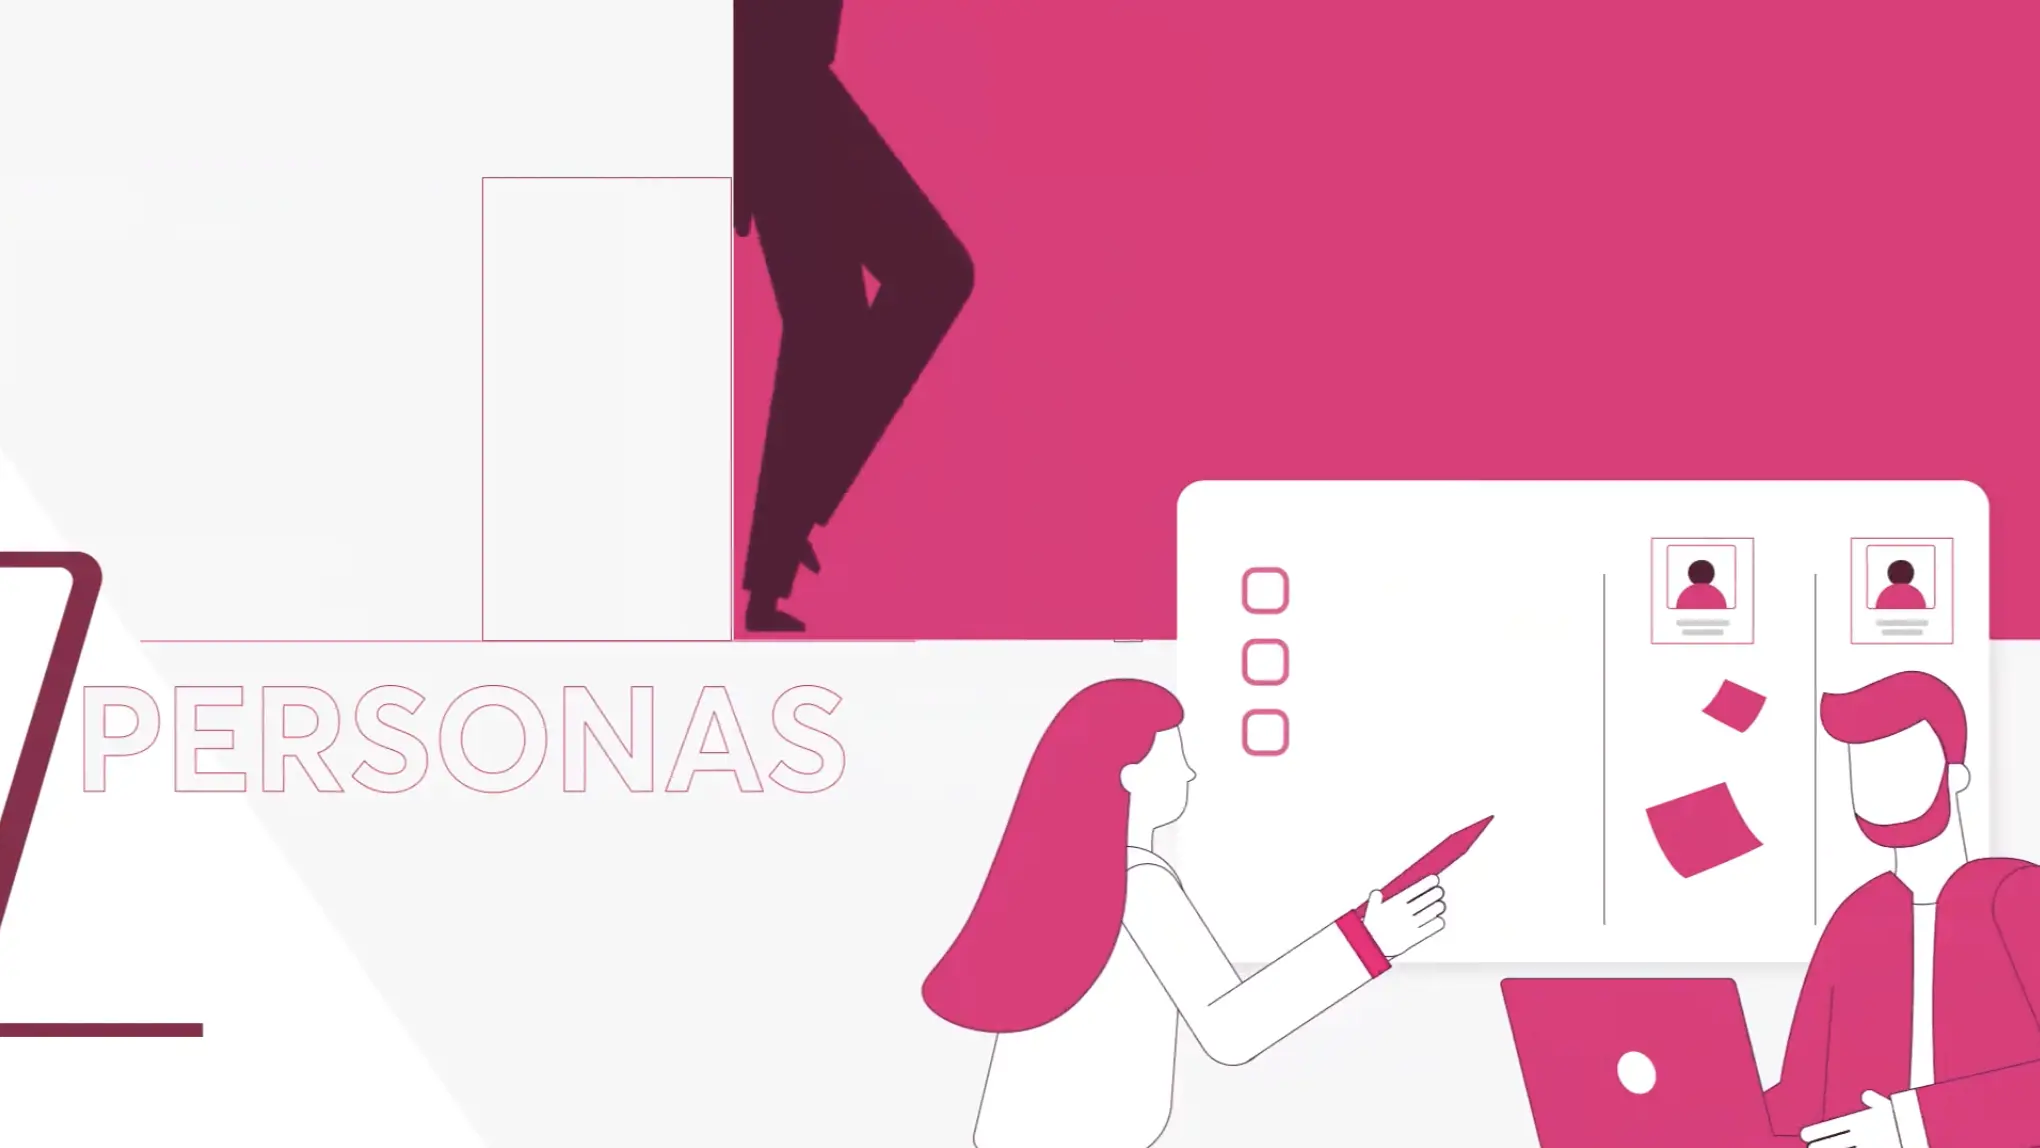 Illustration showing the process of creating user personas, with stylized figures and design elements in pink and white.